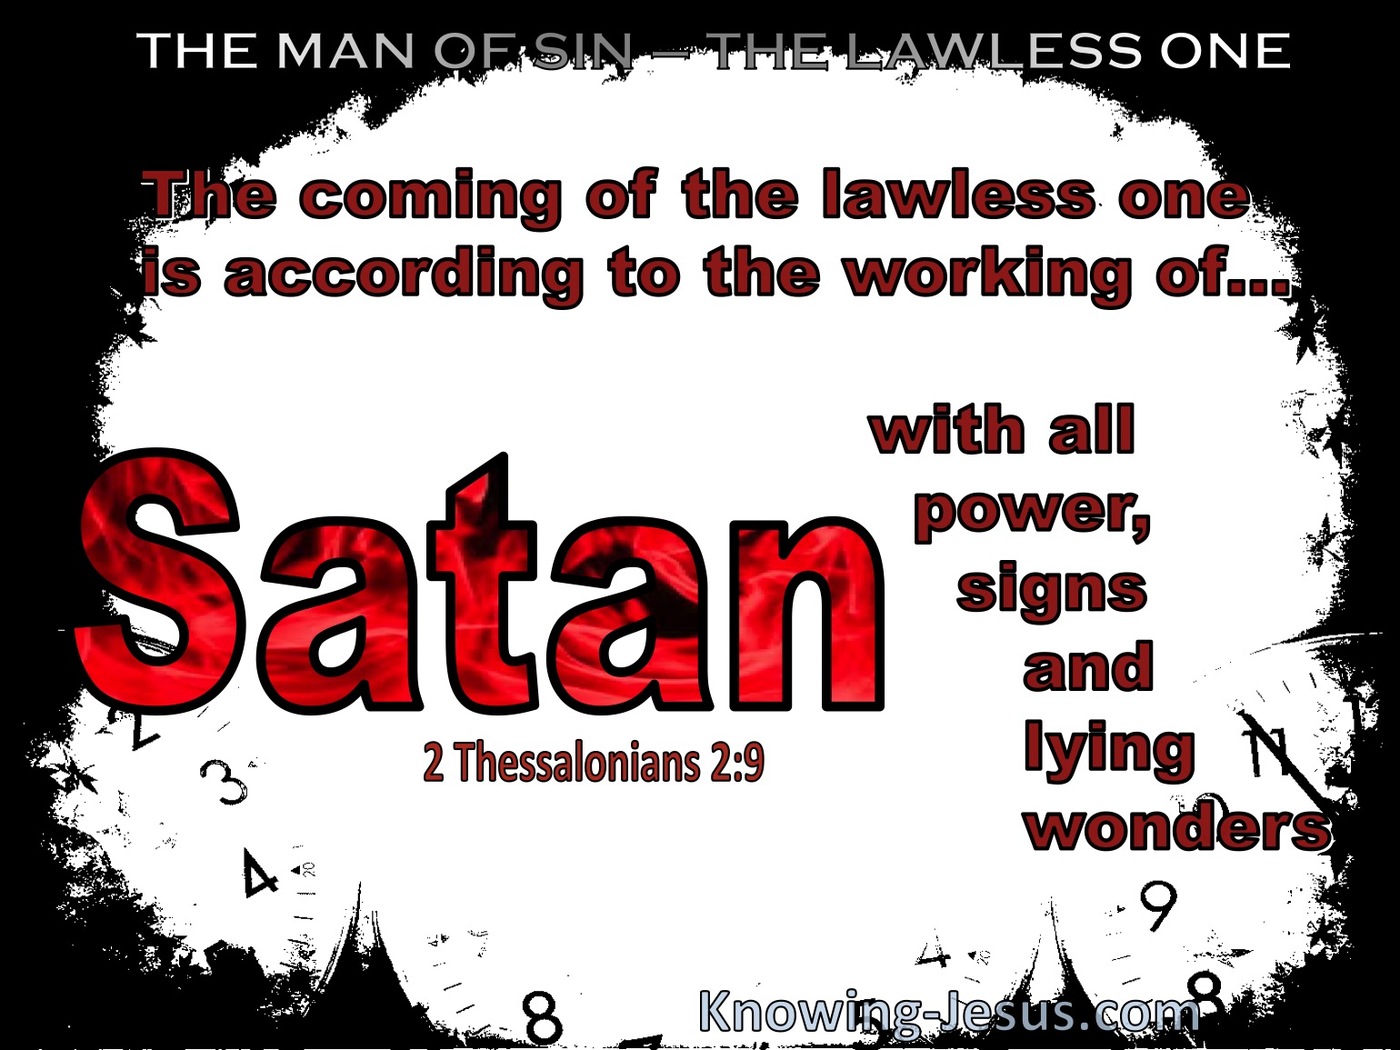 2 Thessalonians 2:9 The Coming Of The Lawless One Is In Accordance With Power Signs nS Lying Wonders (white)